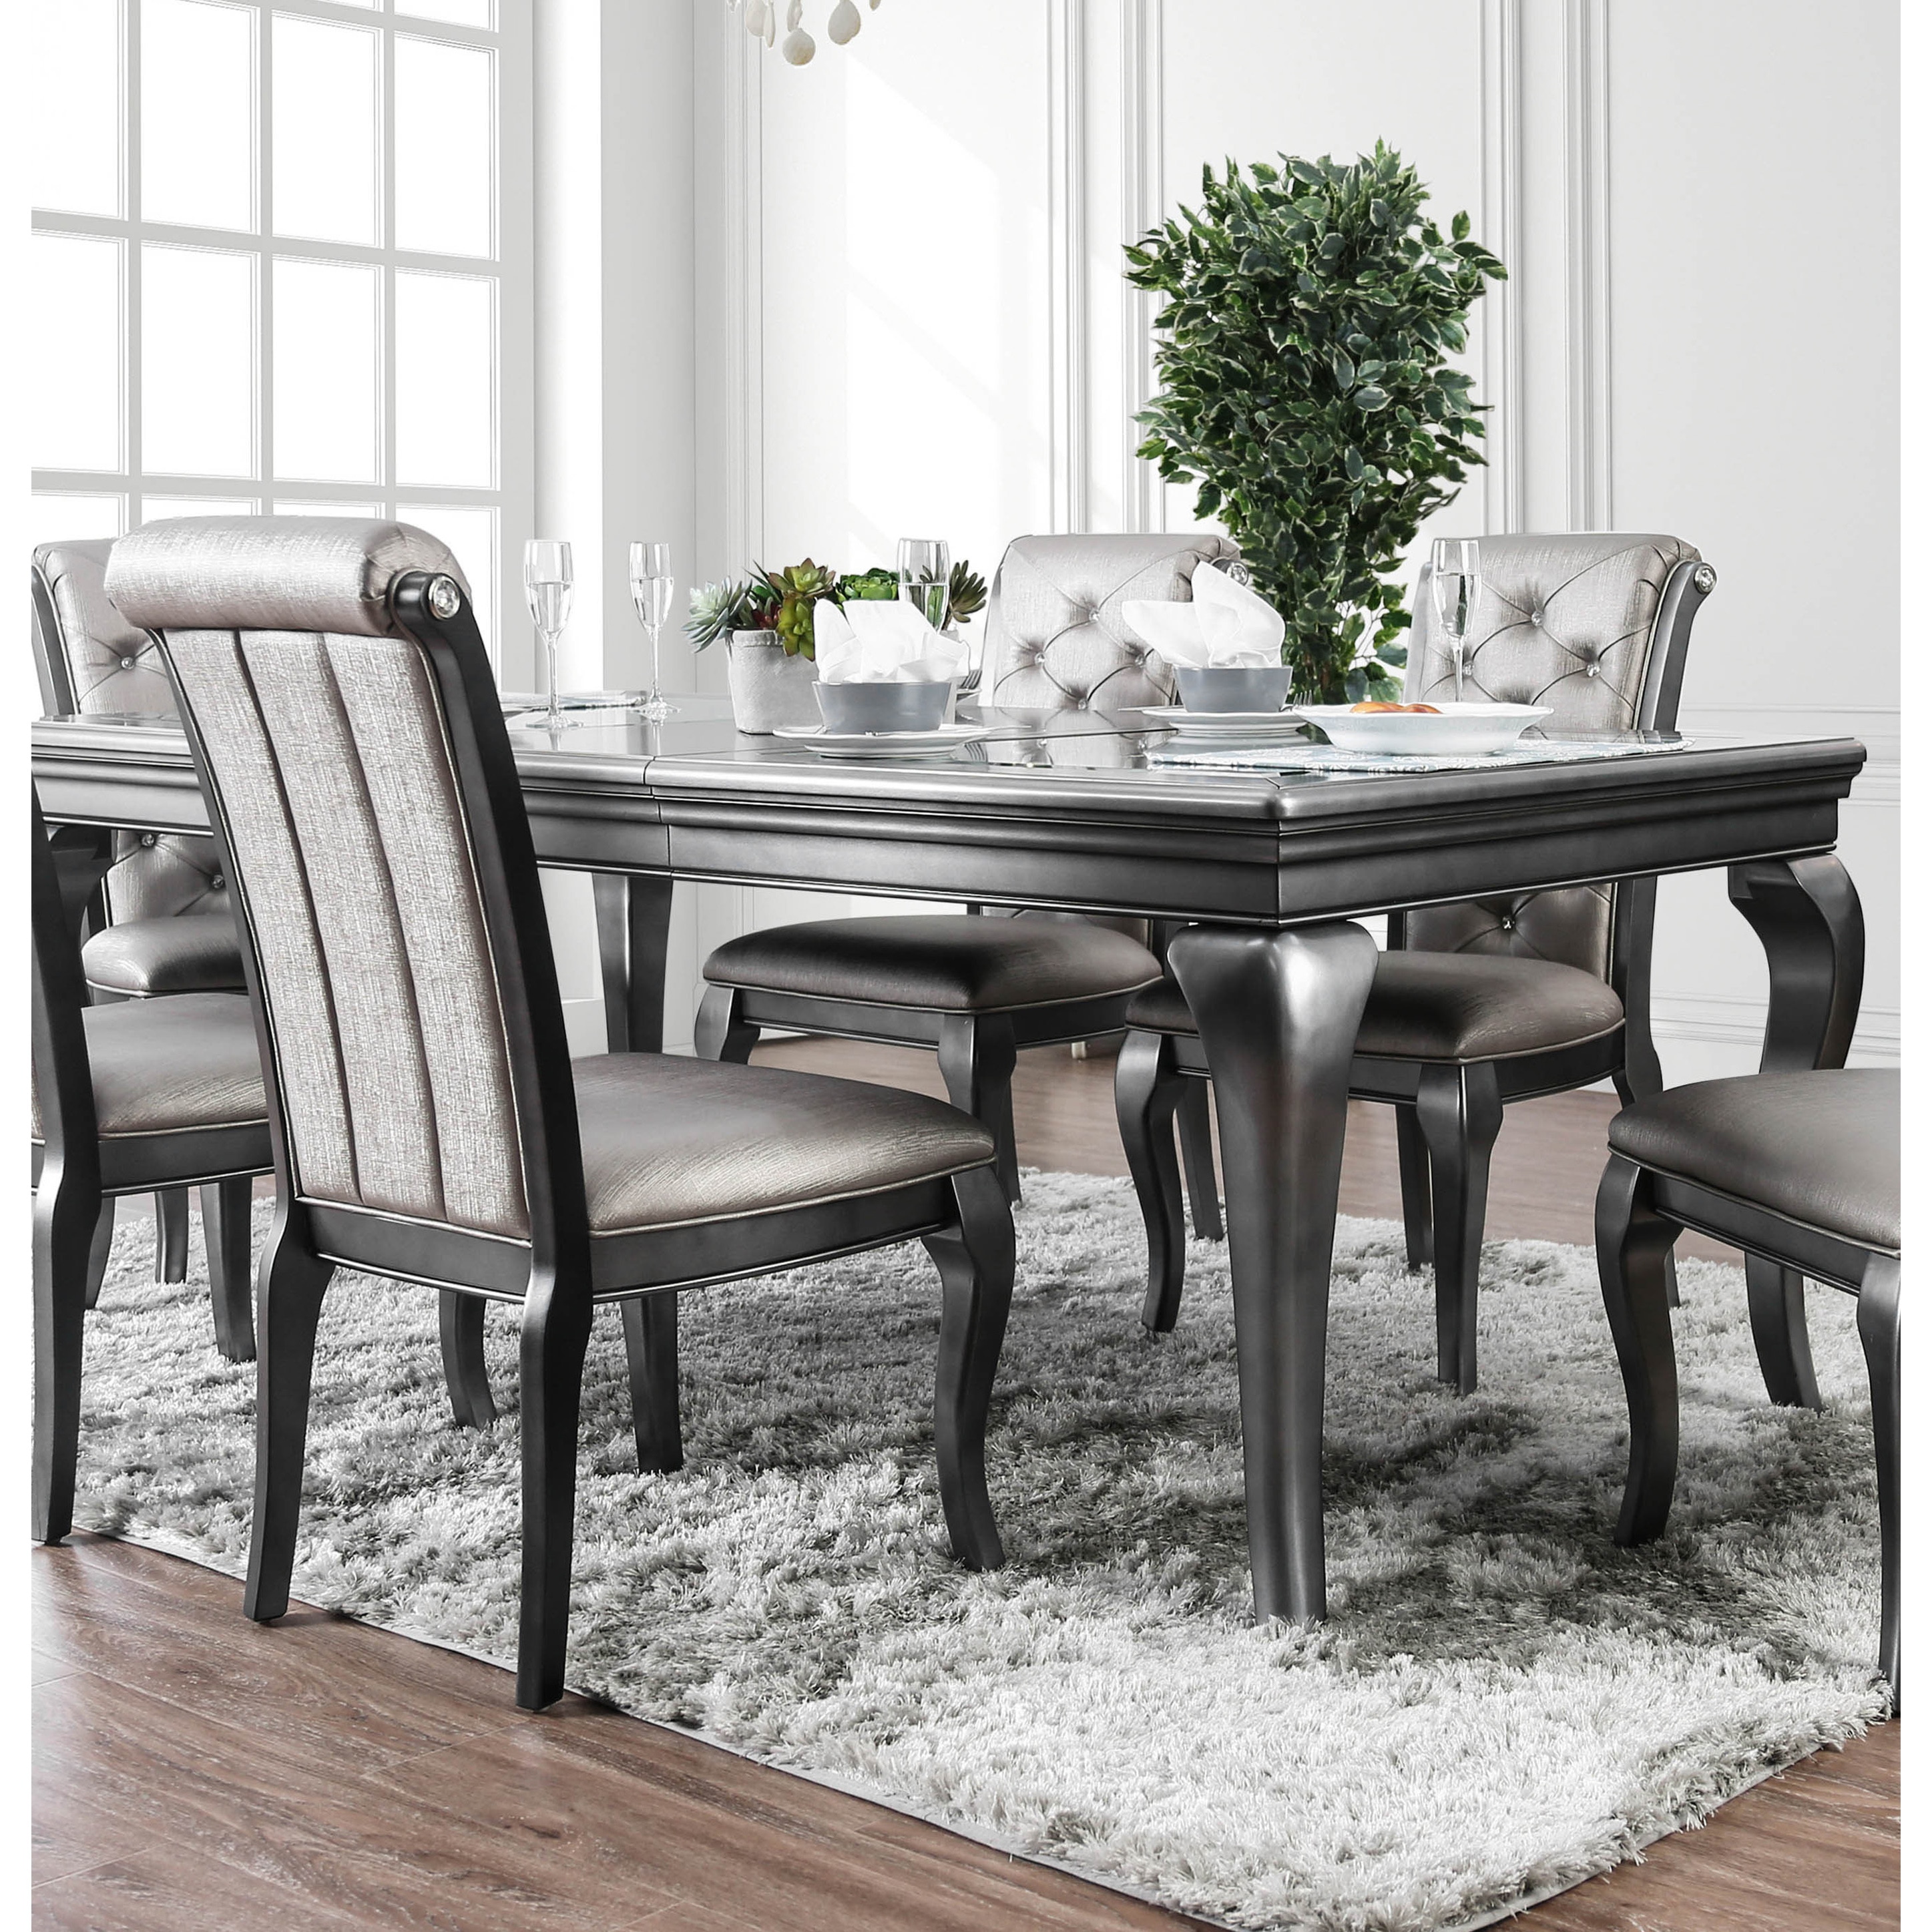 Grey Dining Room Table And Chairs - The Skempton White Light Brown